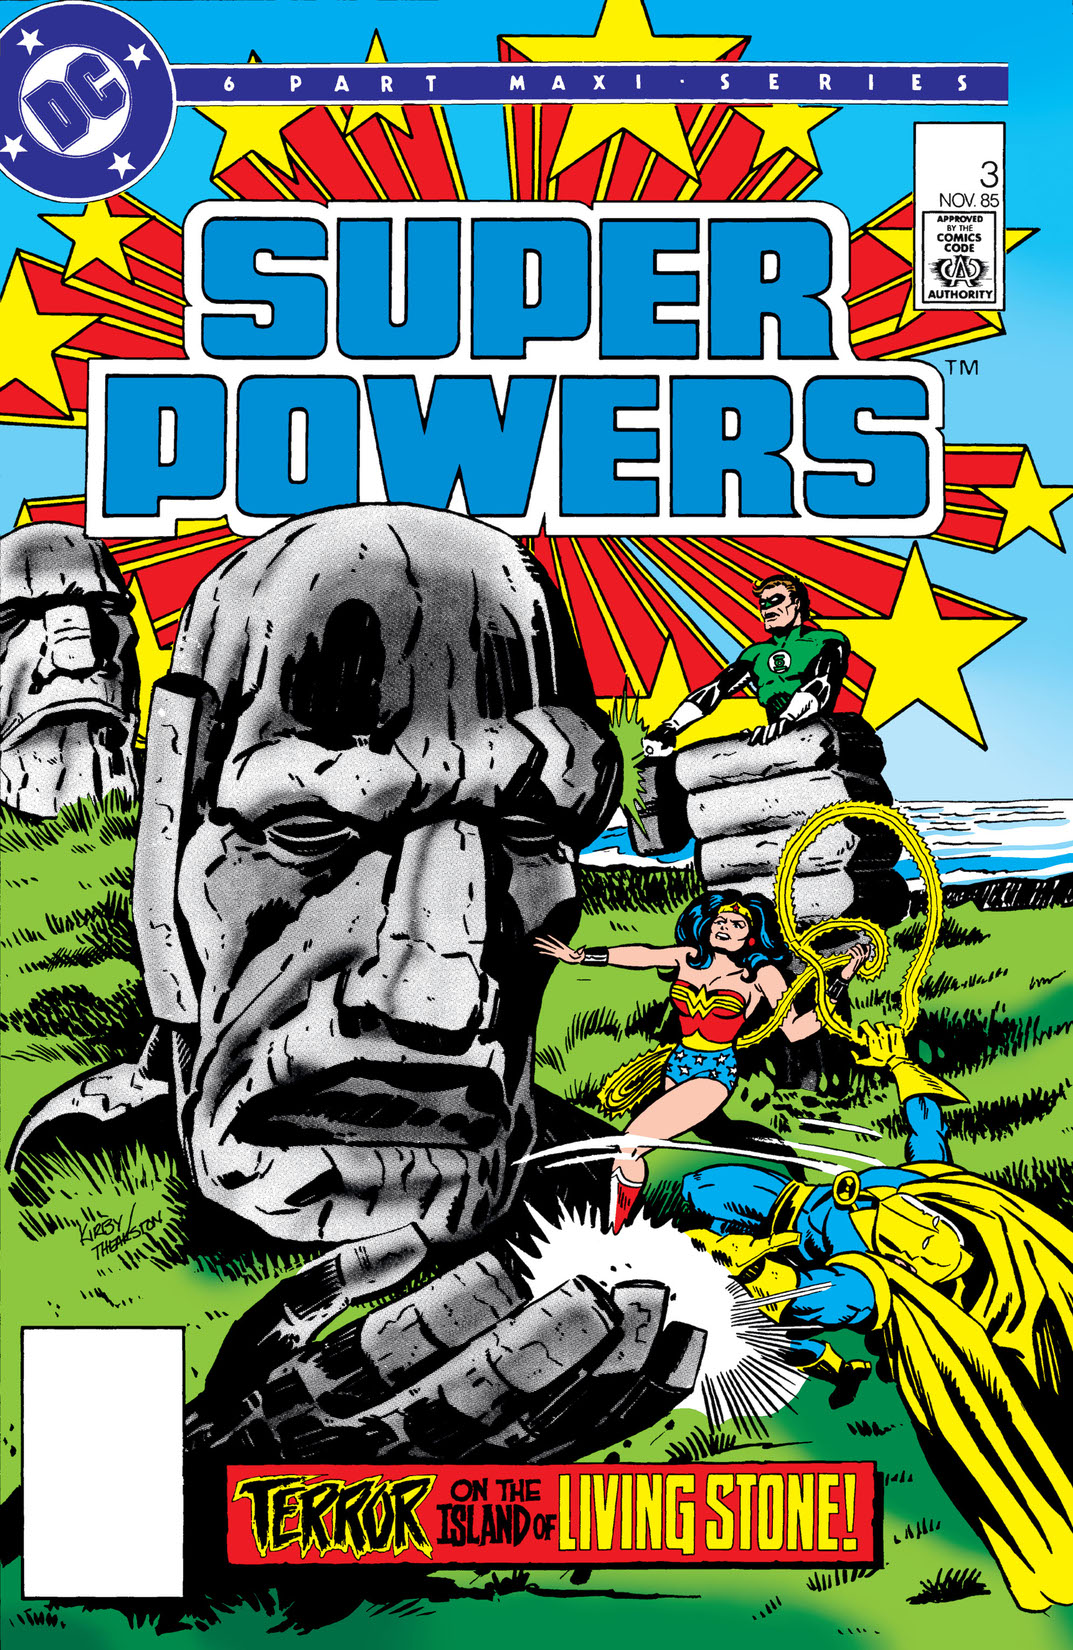 Super Powers (1985-) #3 preview images